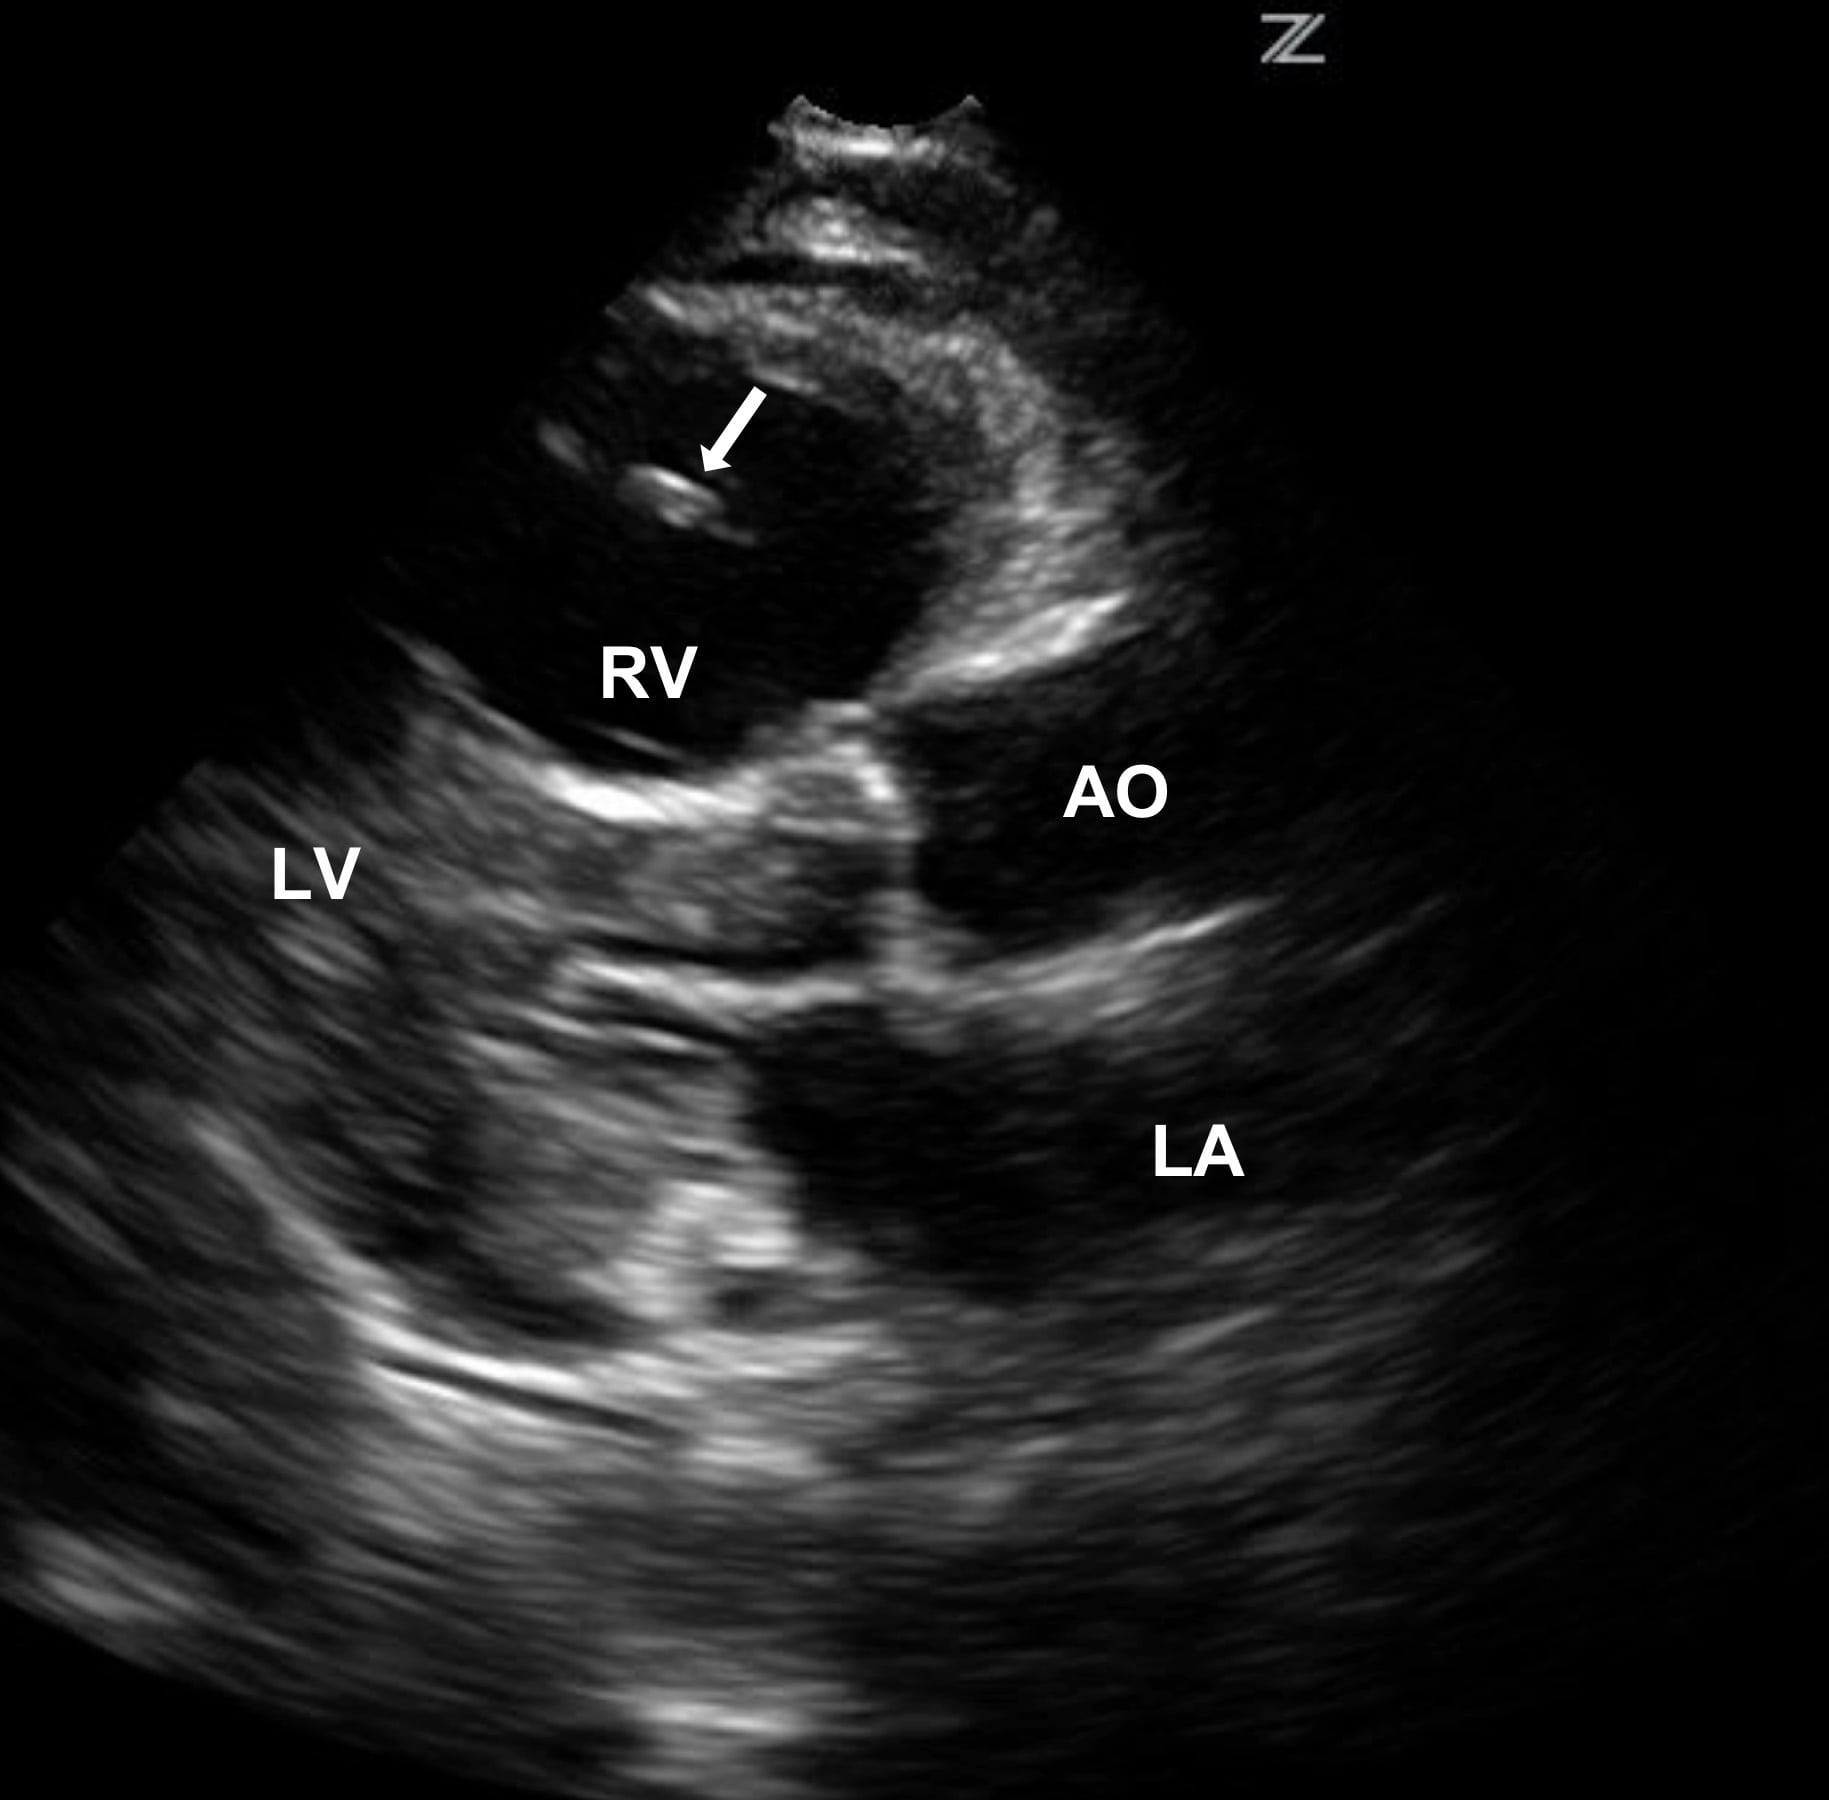 Bedside Echocardiography for Undifferentiated Hypotension: Diagnosis of a Right Heart Thrombus